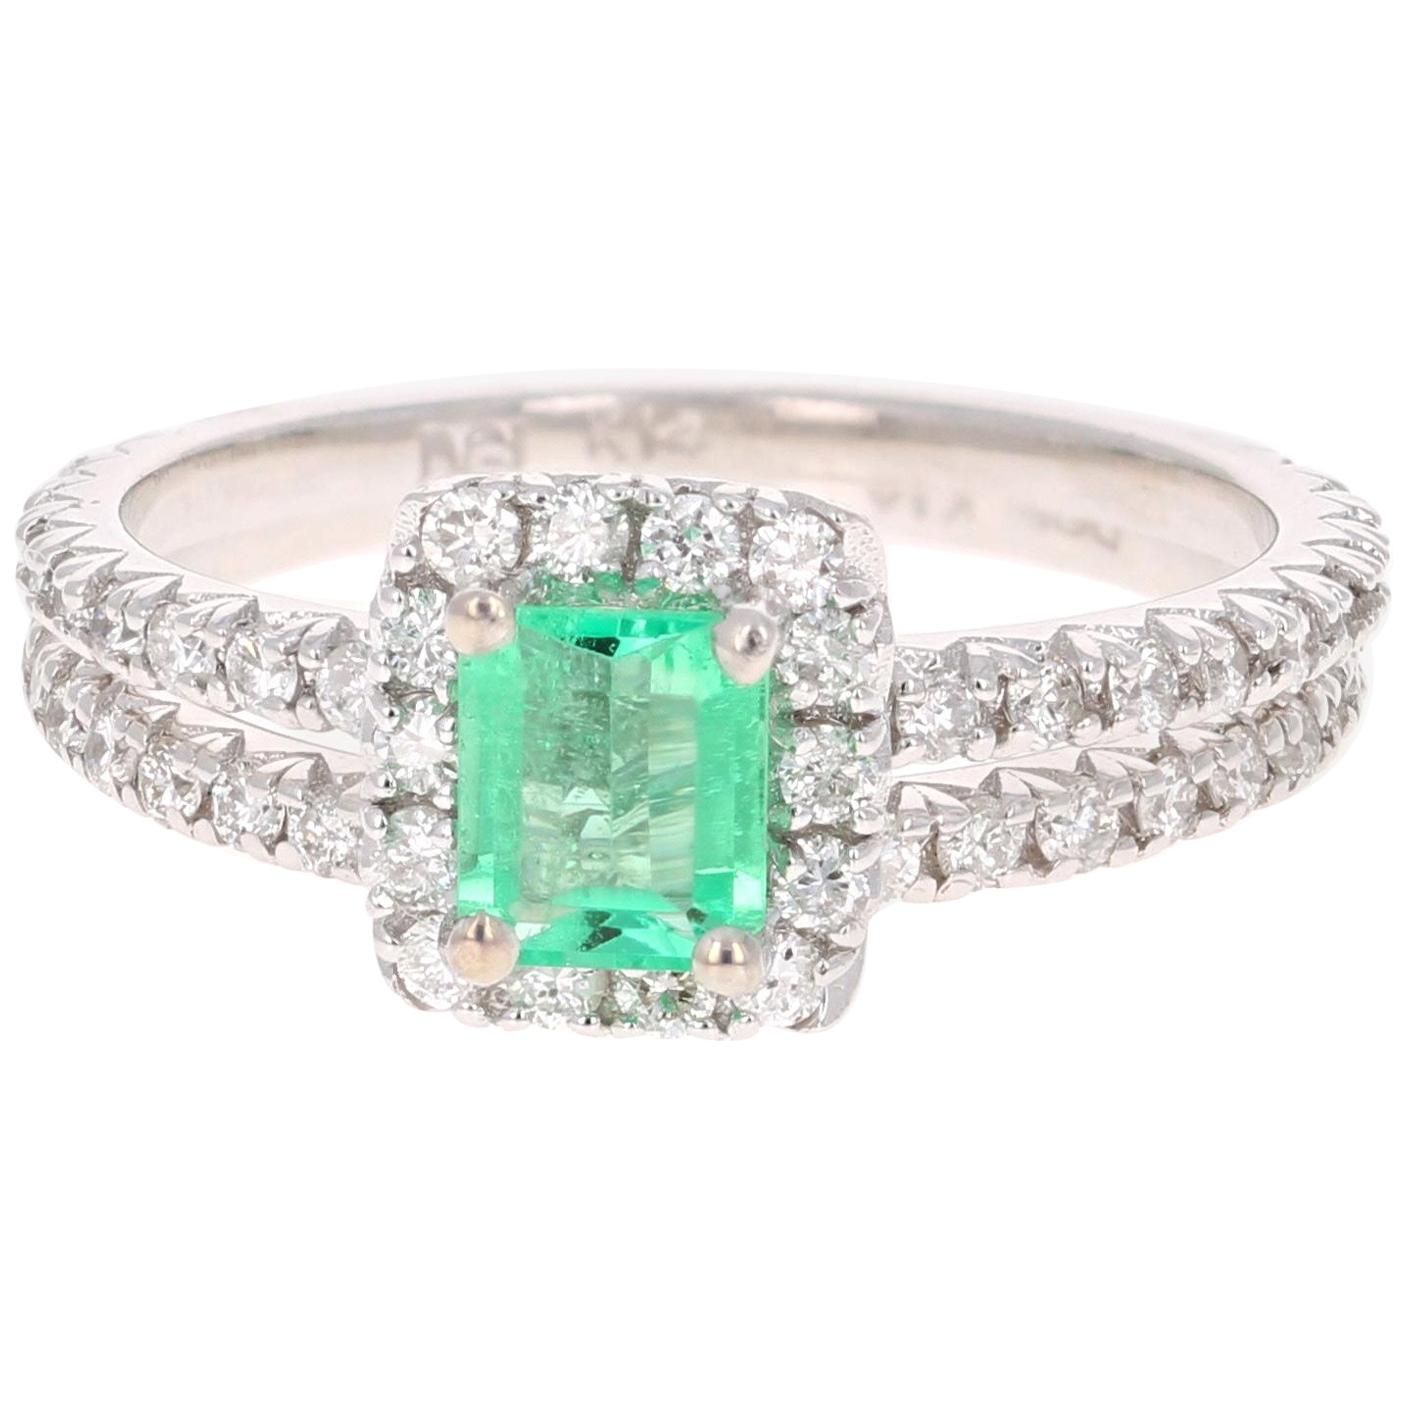 1.23 Carat Emerald Diamond White Gold Engagement Ring with Band